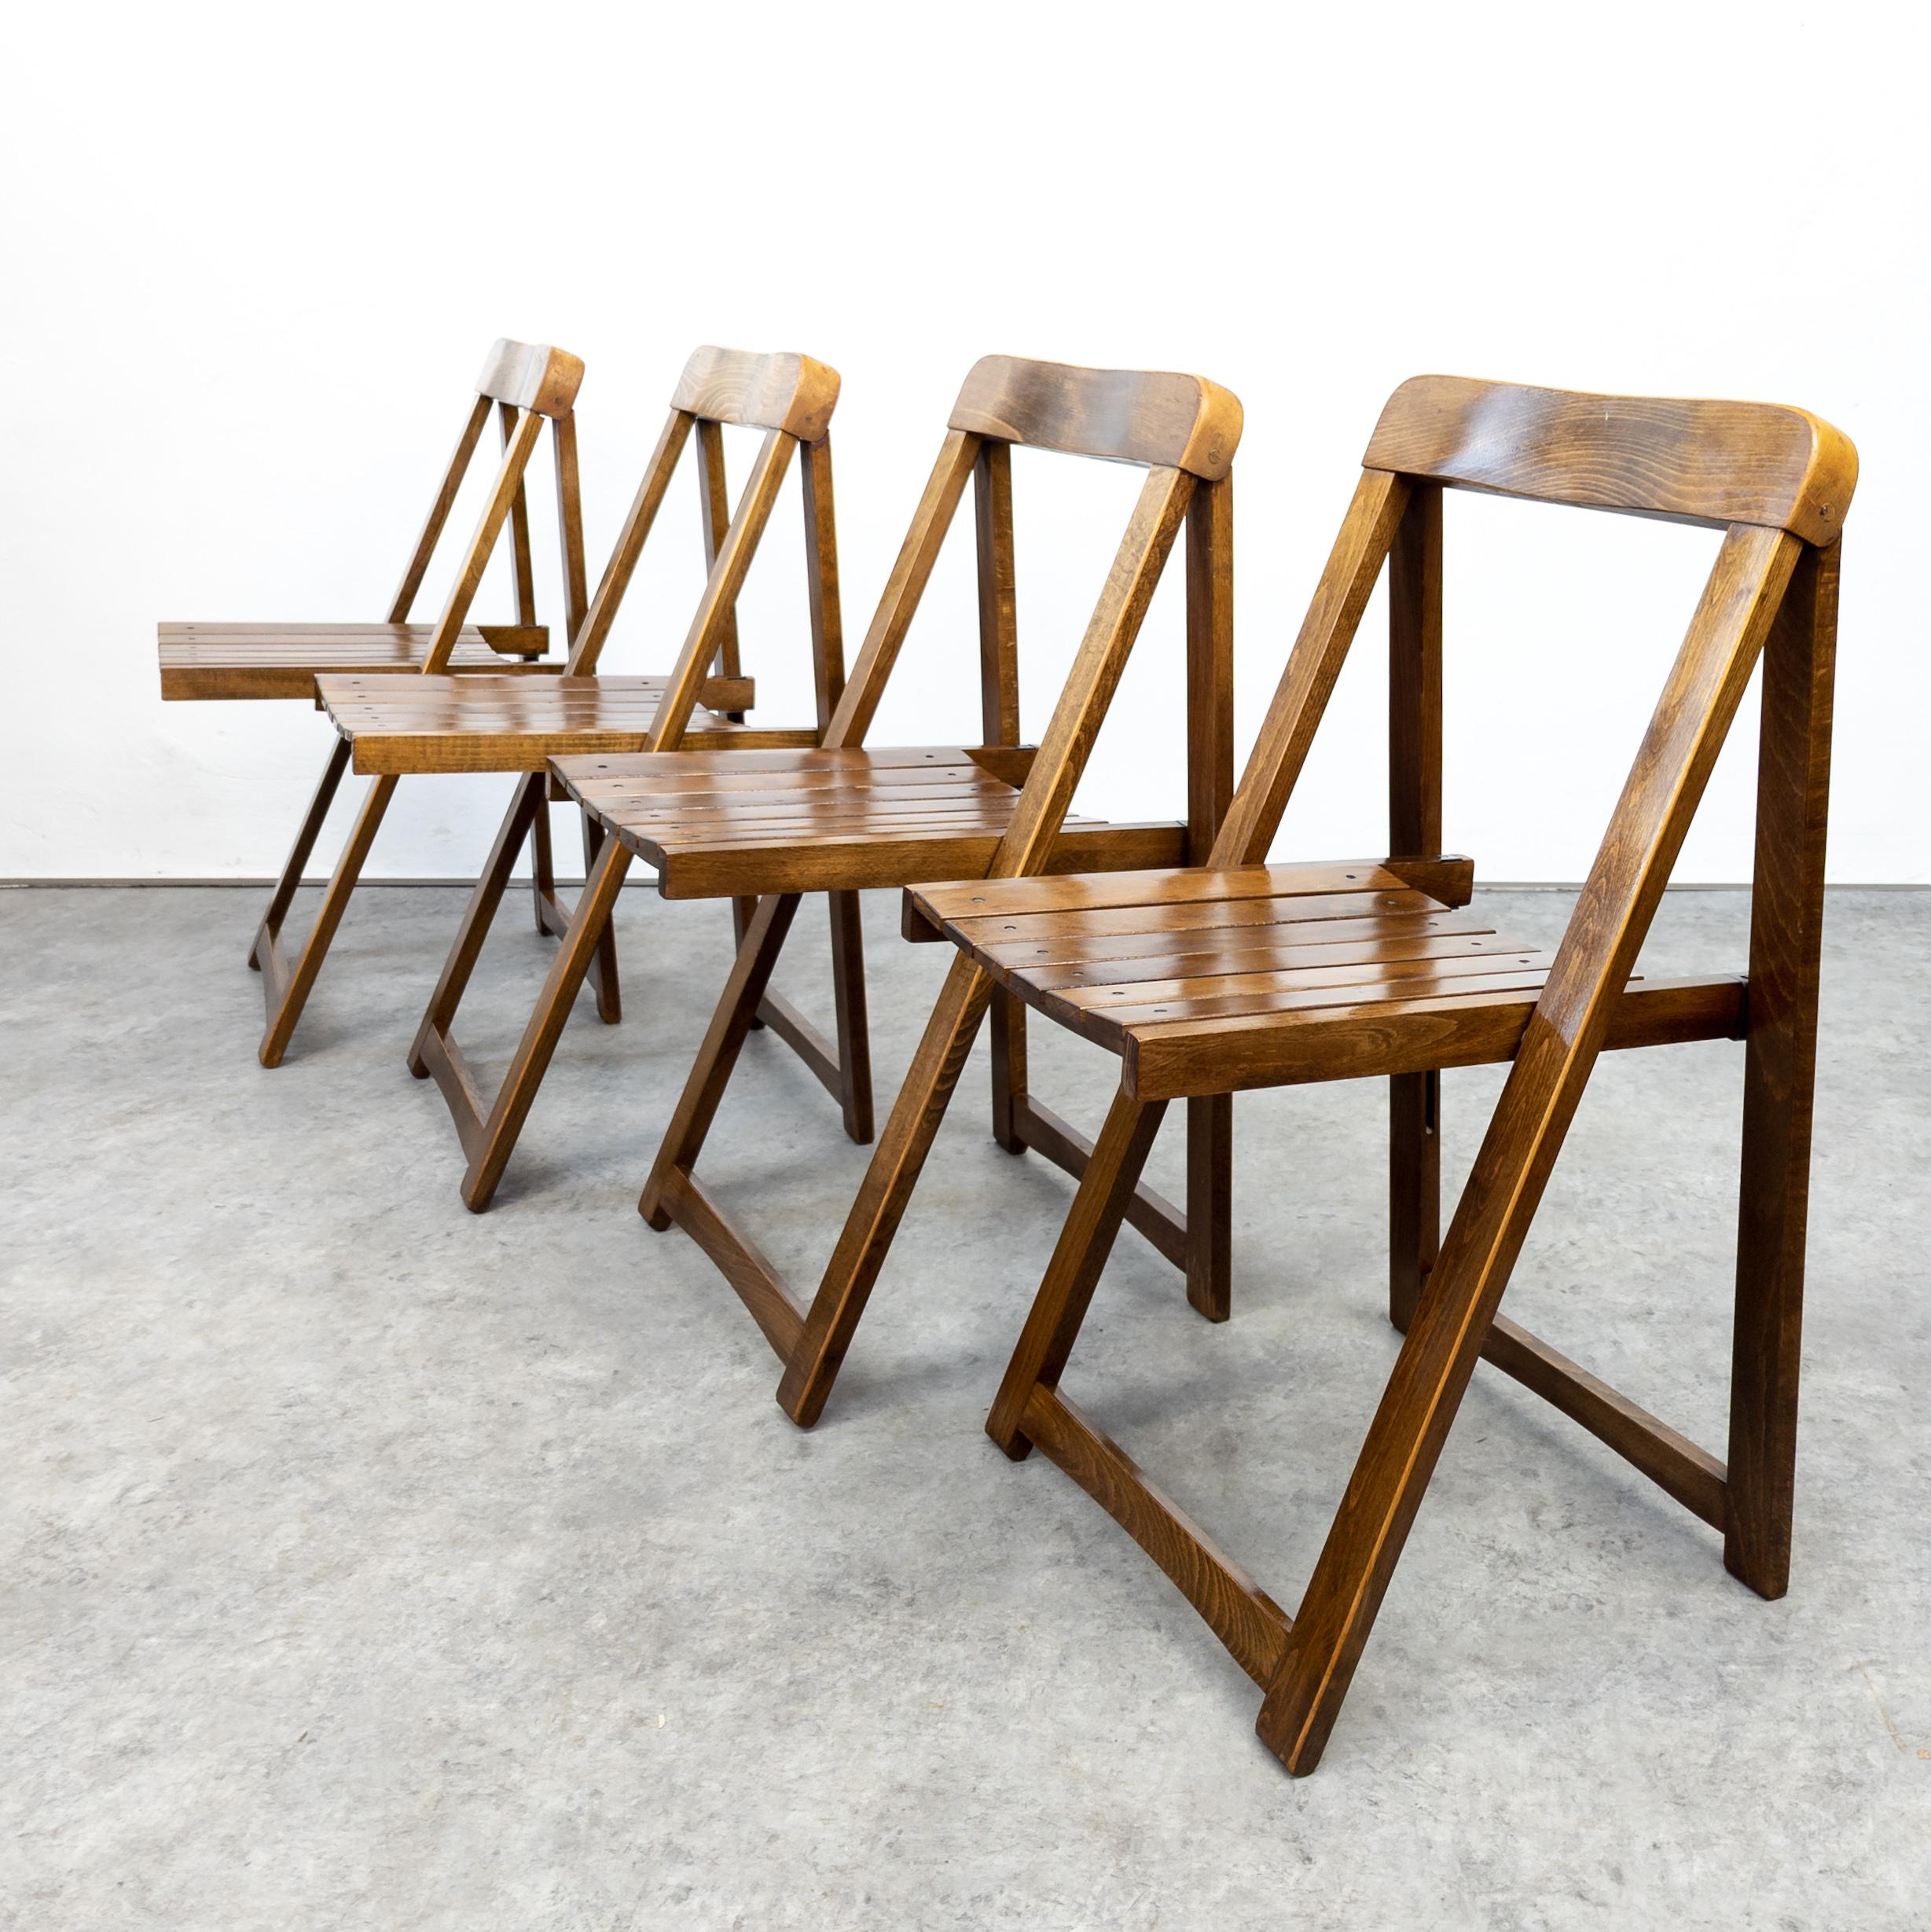 Mid-Century Modern Set of 4 Vintage Folding Chairs by Aldo Jacober for Alberto Bazzani